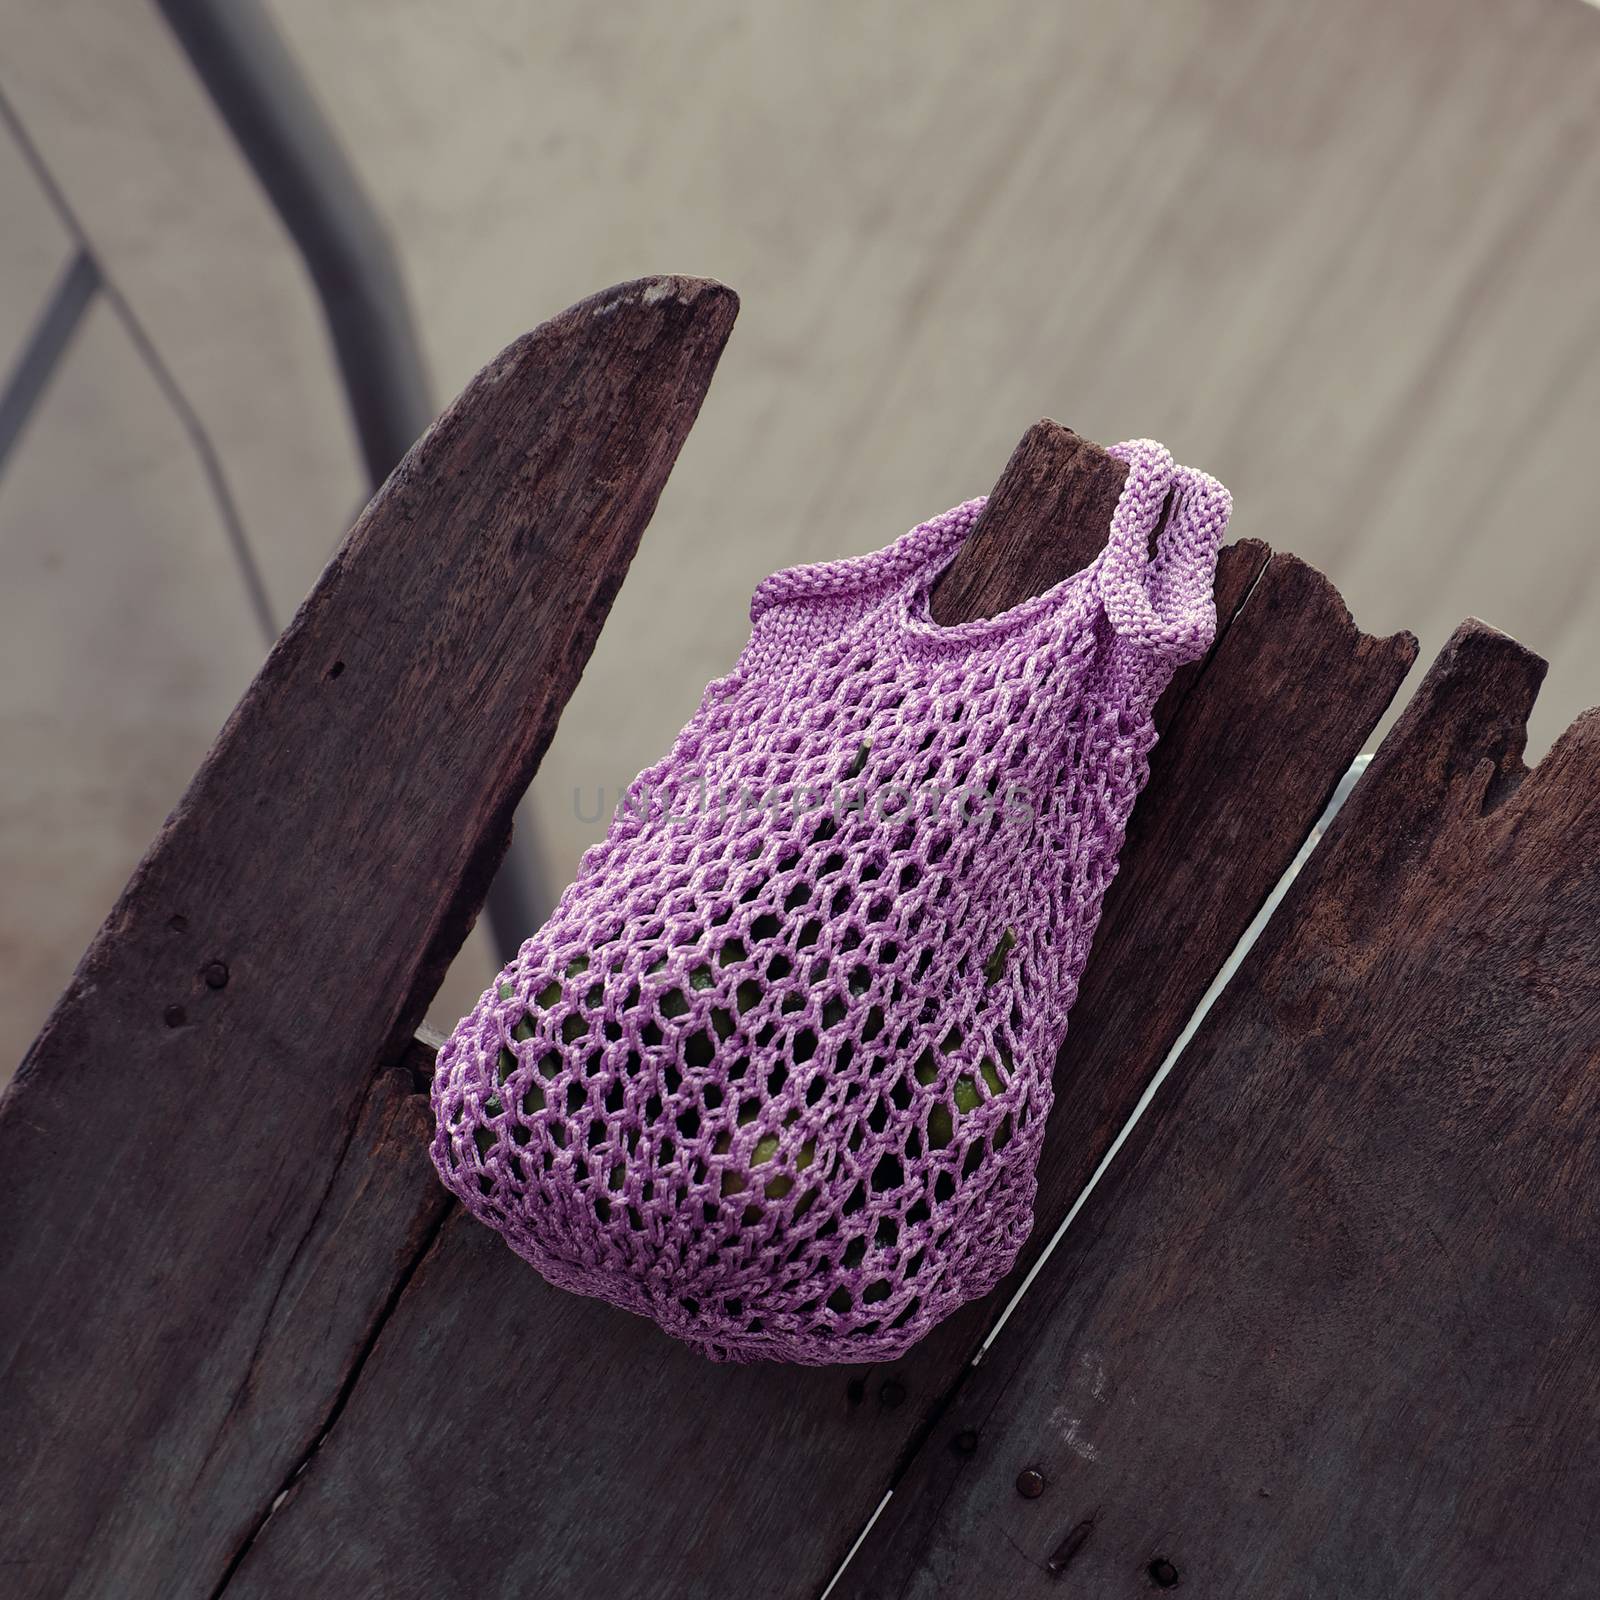 knit hand made hand bag from yarn by xuanhuongho